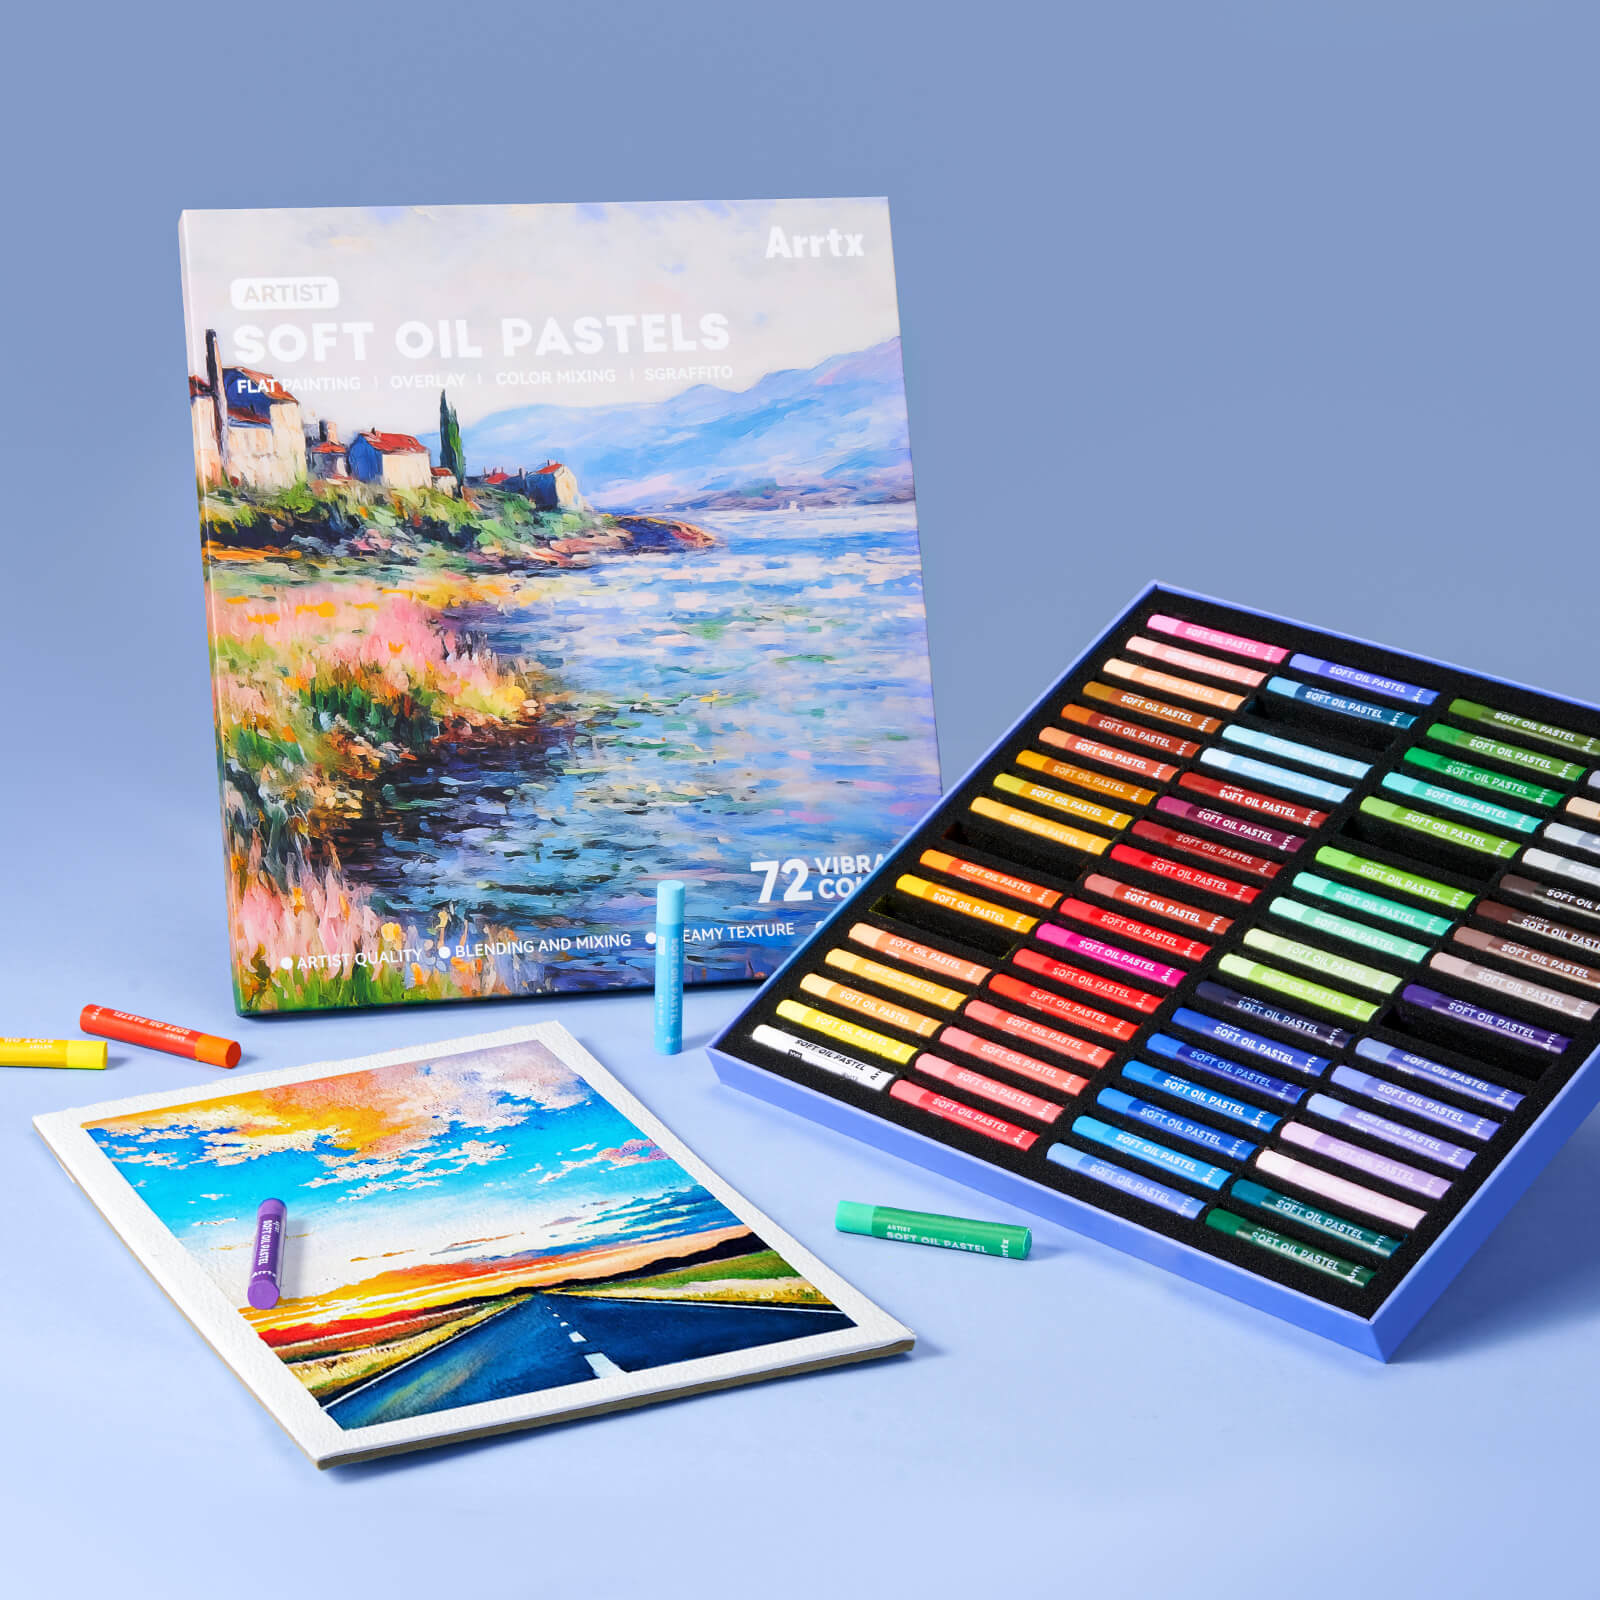 Arrtx 72 Colors Oil Pastels Smooth Drawing Pastel Set